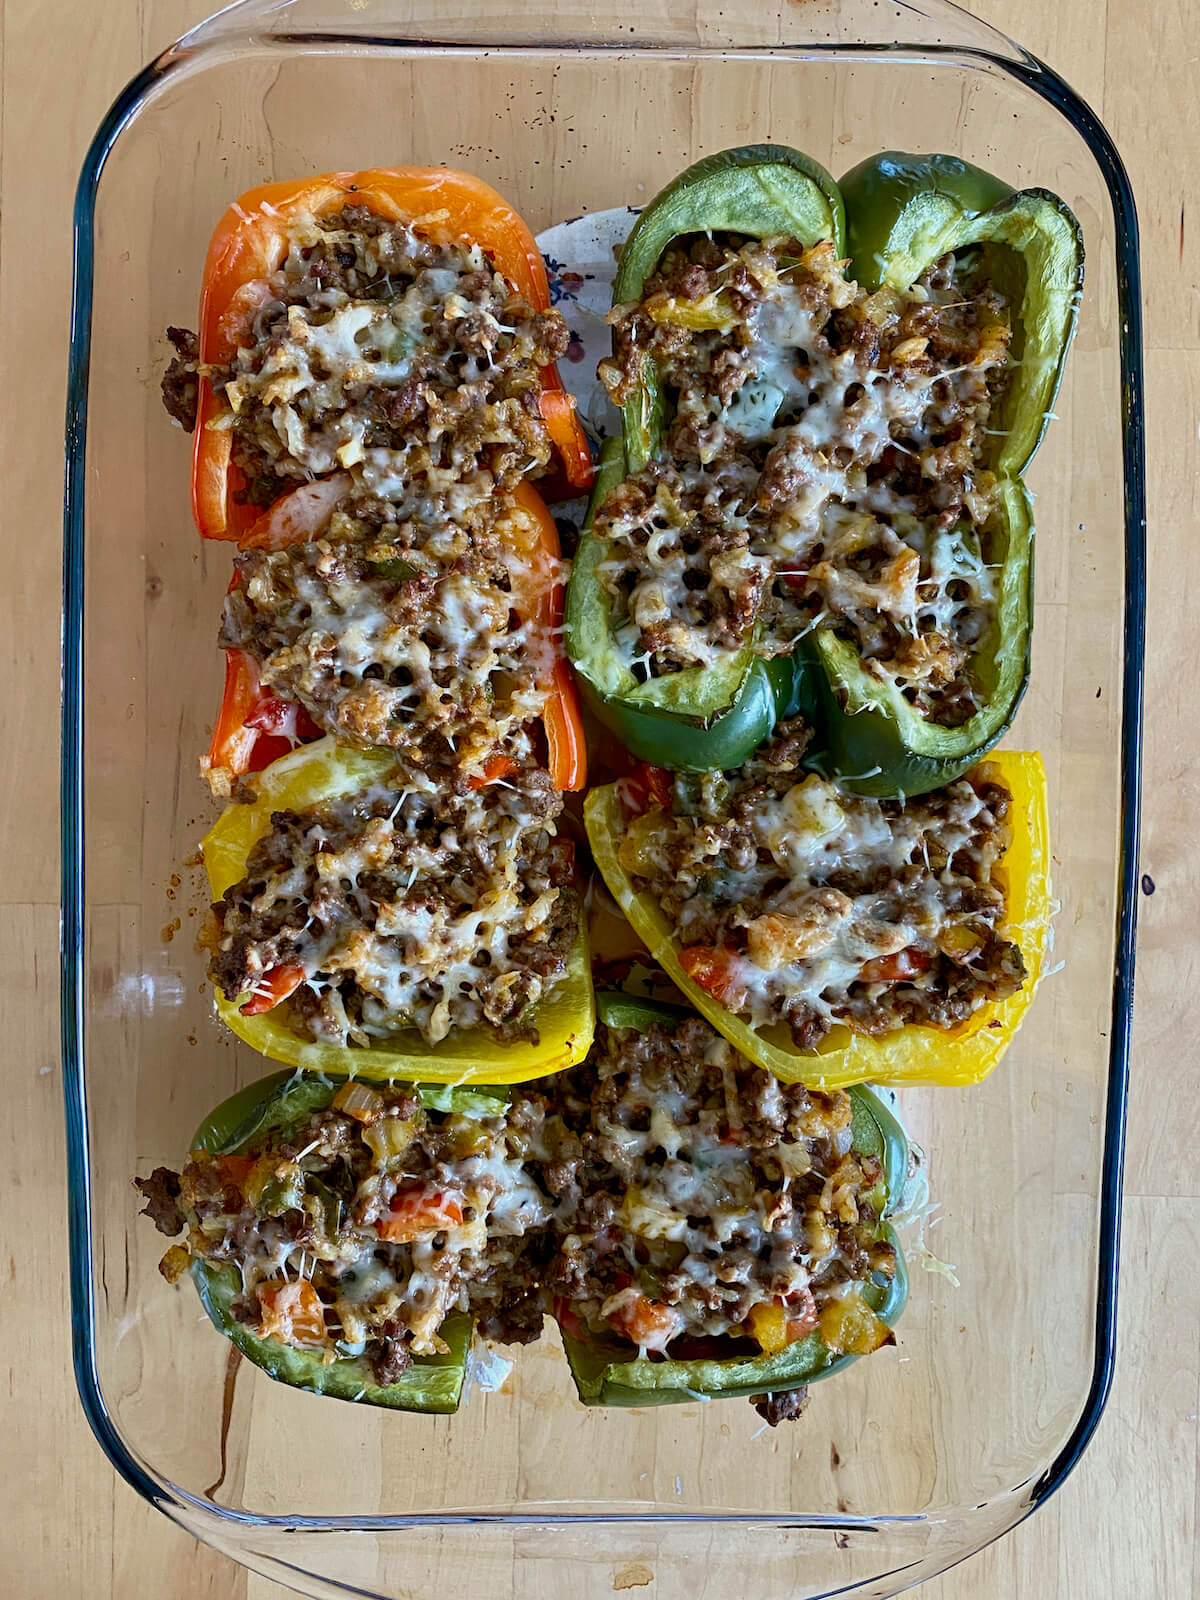 Baked stuffed peppers in a casserole dish.